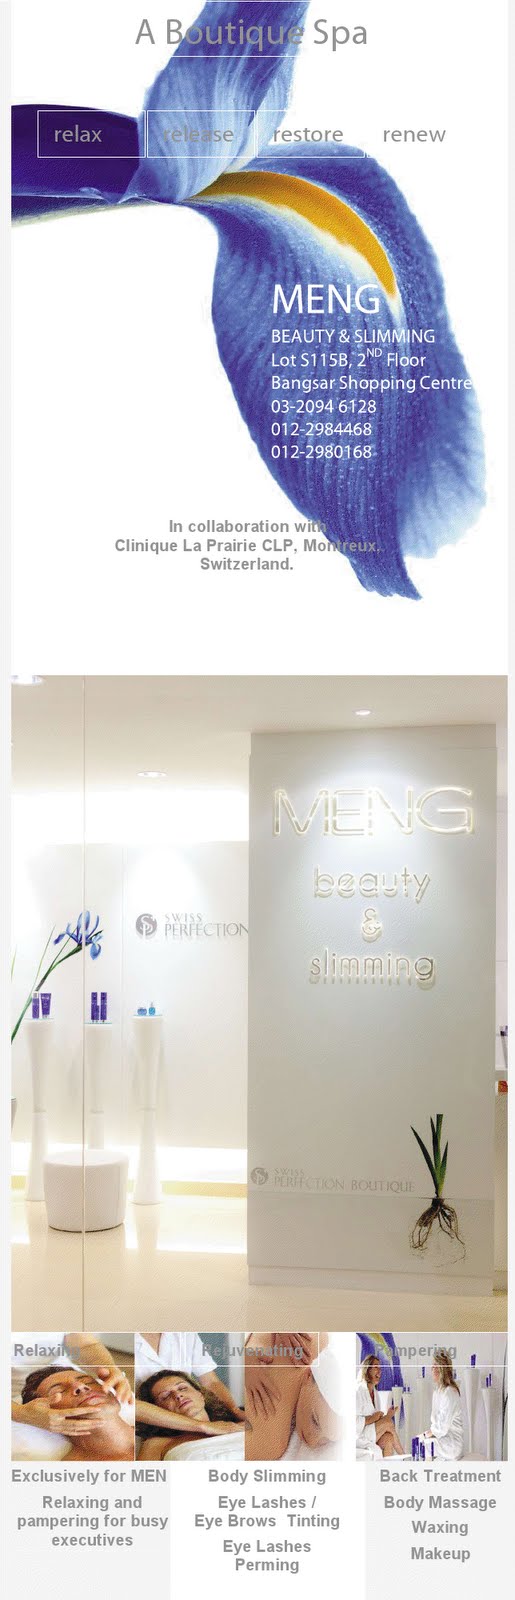 Swiss Perfection Malaysia by Meng Beauty & Slimming